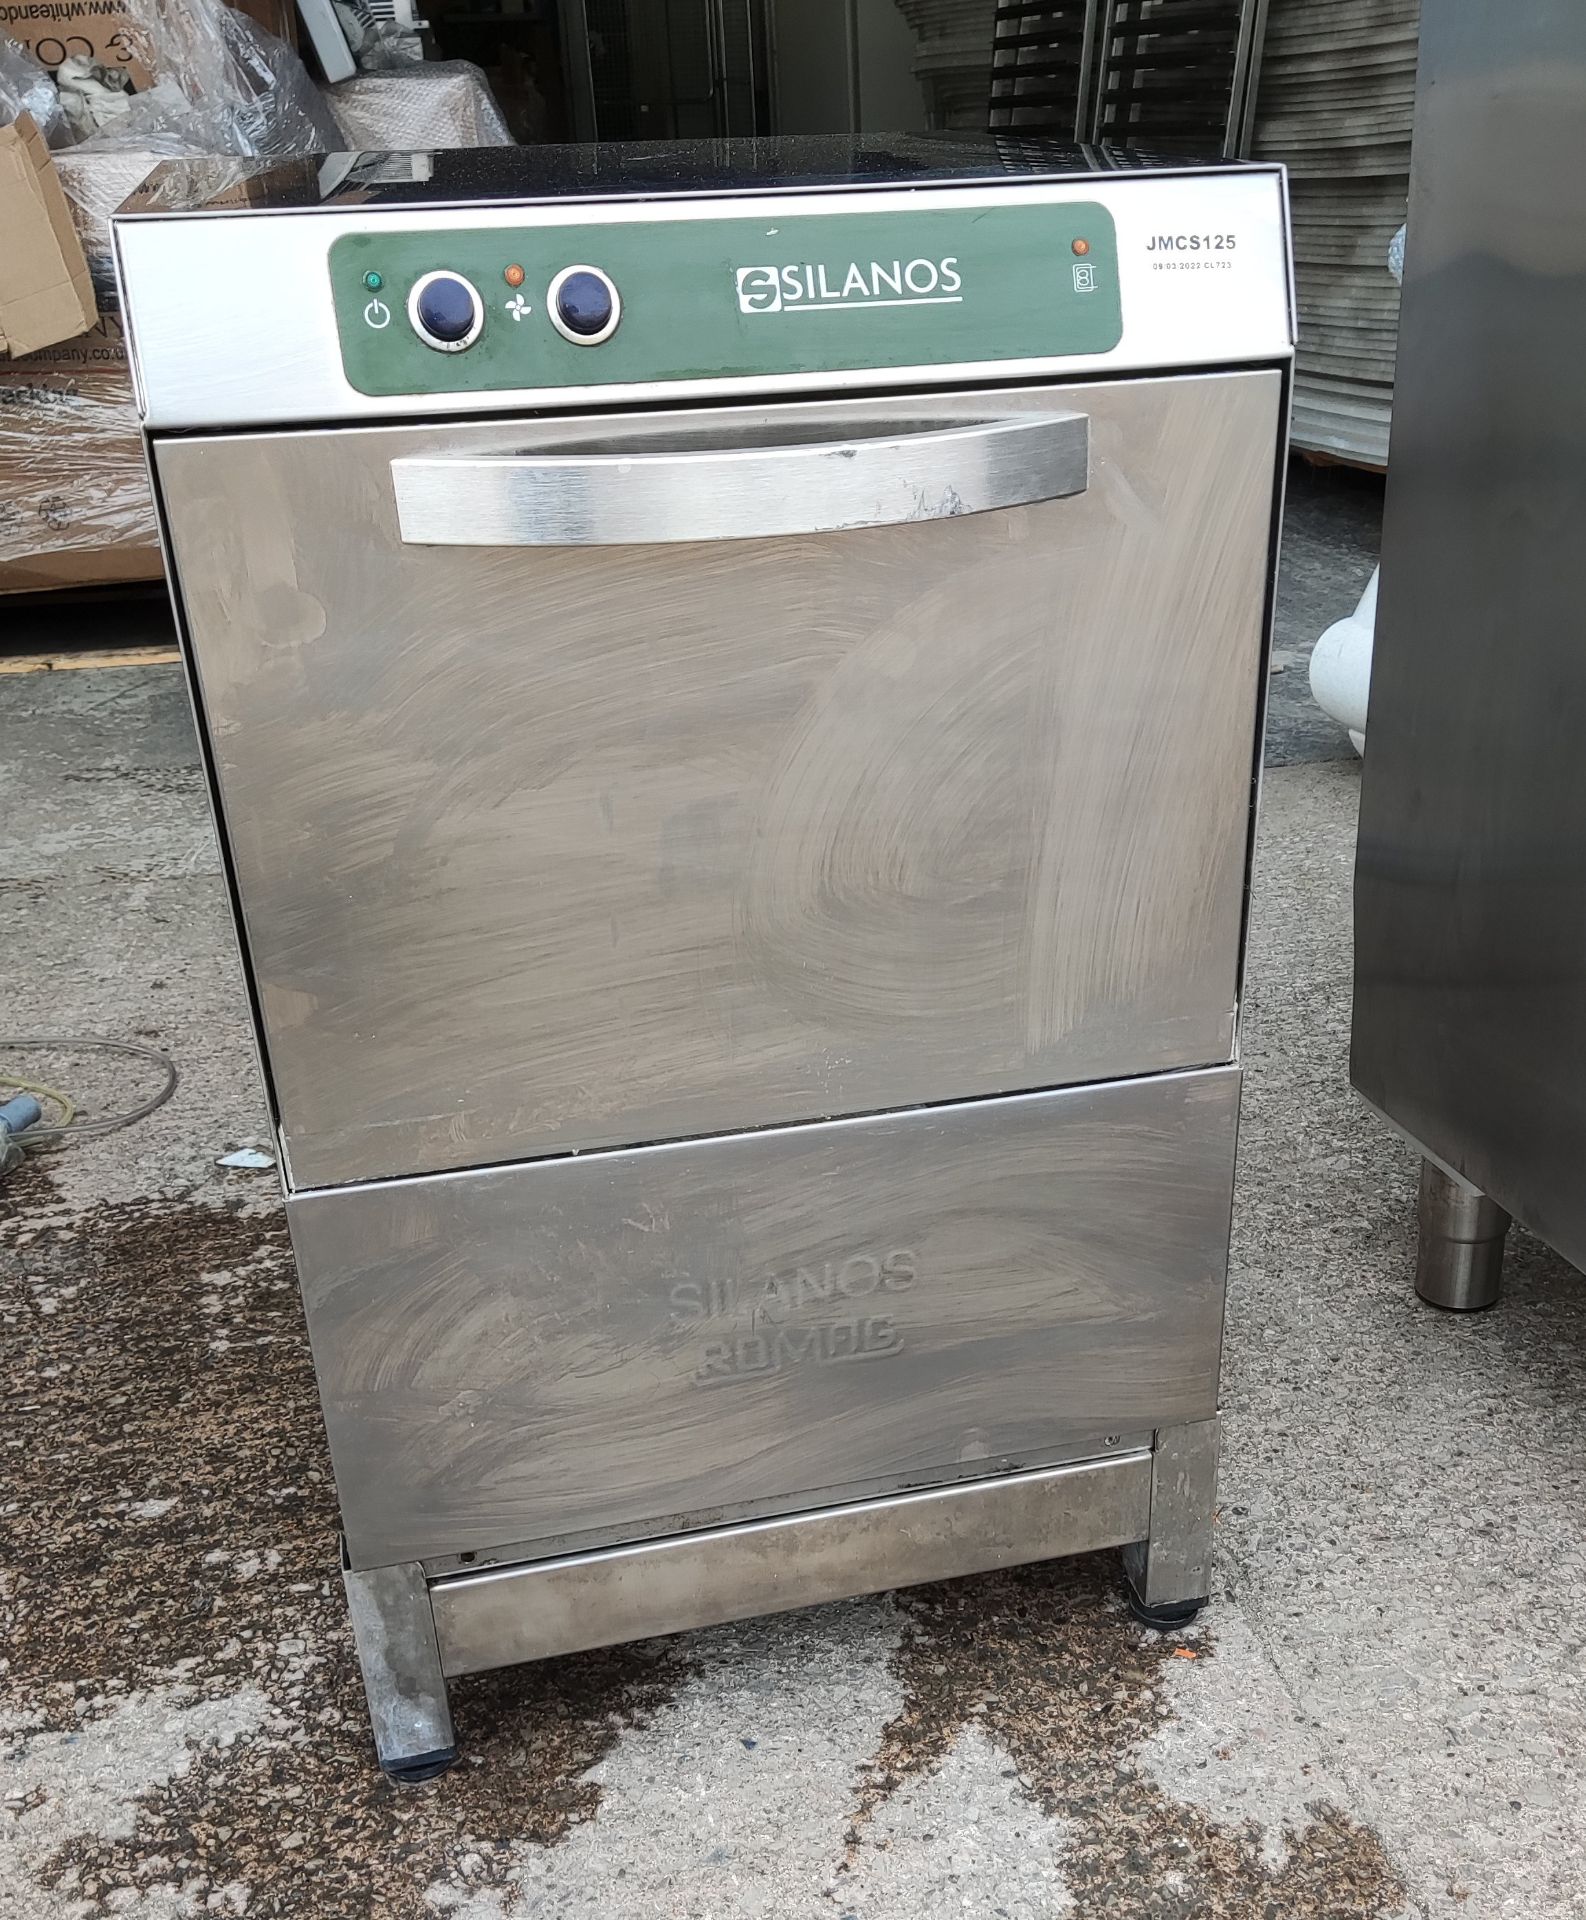 1 x Silanos E40 ECO Undercounter Glass Washer with Low Stand - JMCS125 - CL723 - Location: Altrincha - Image 8 of 12